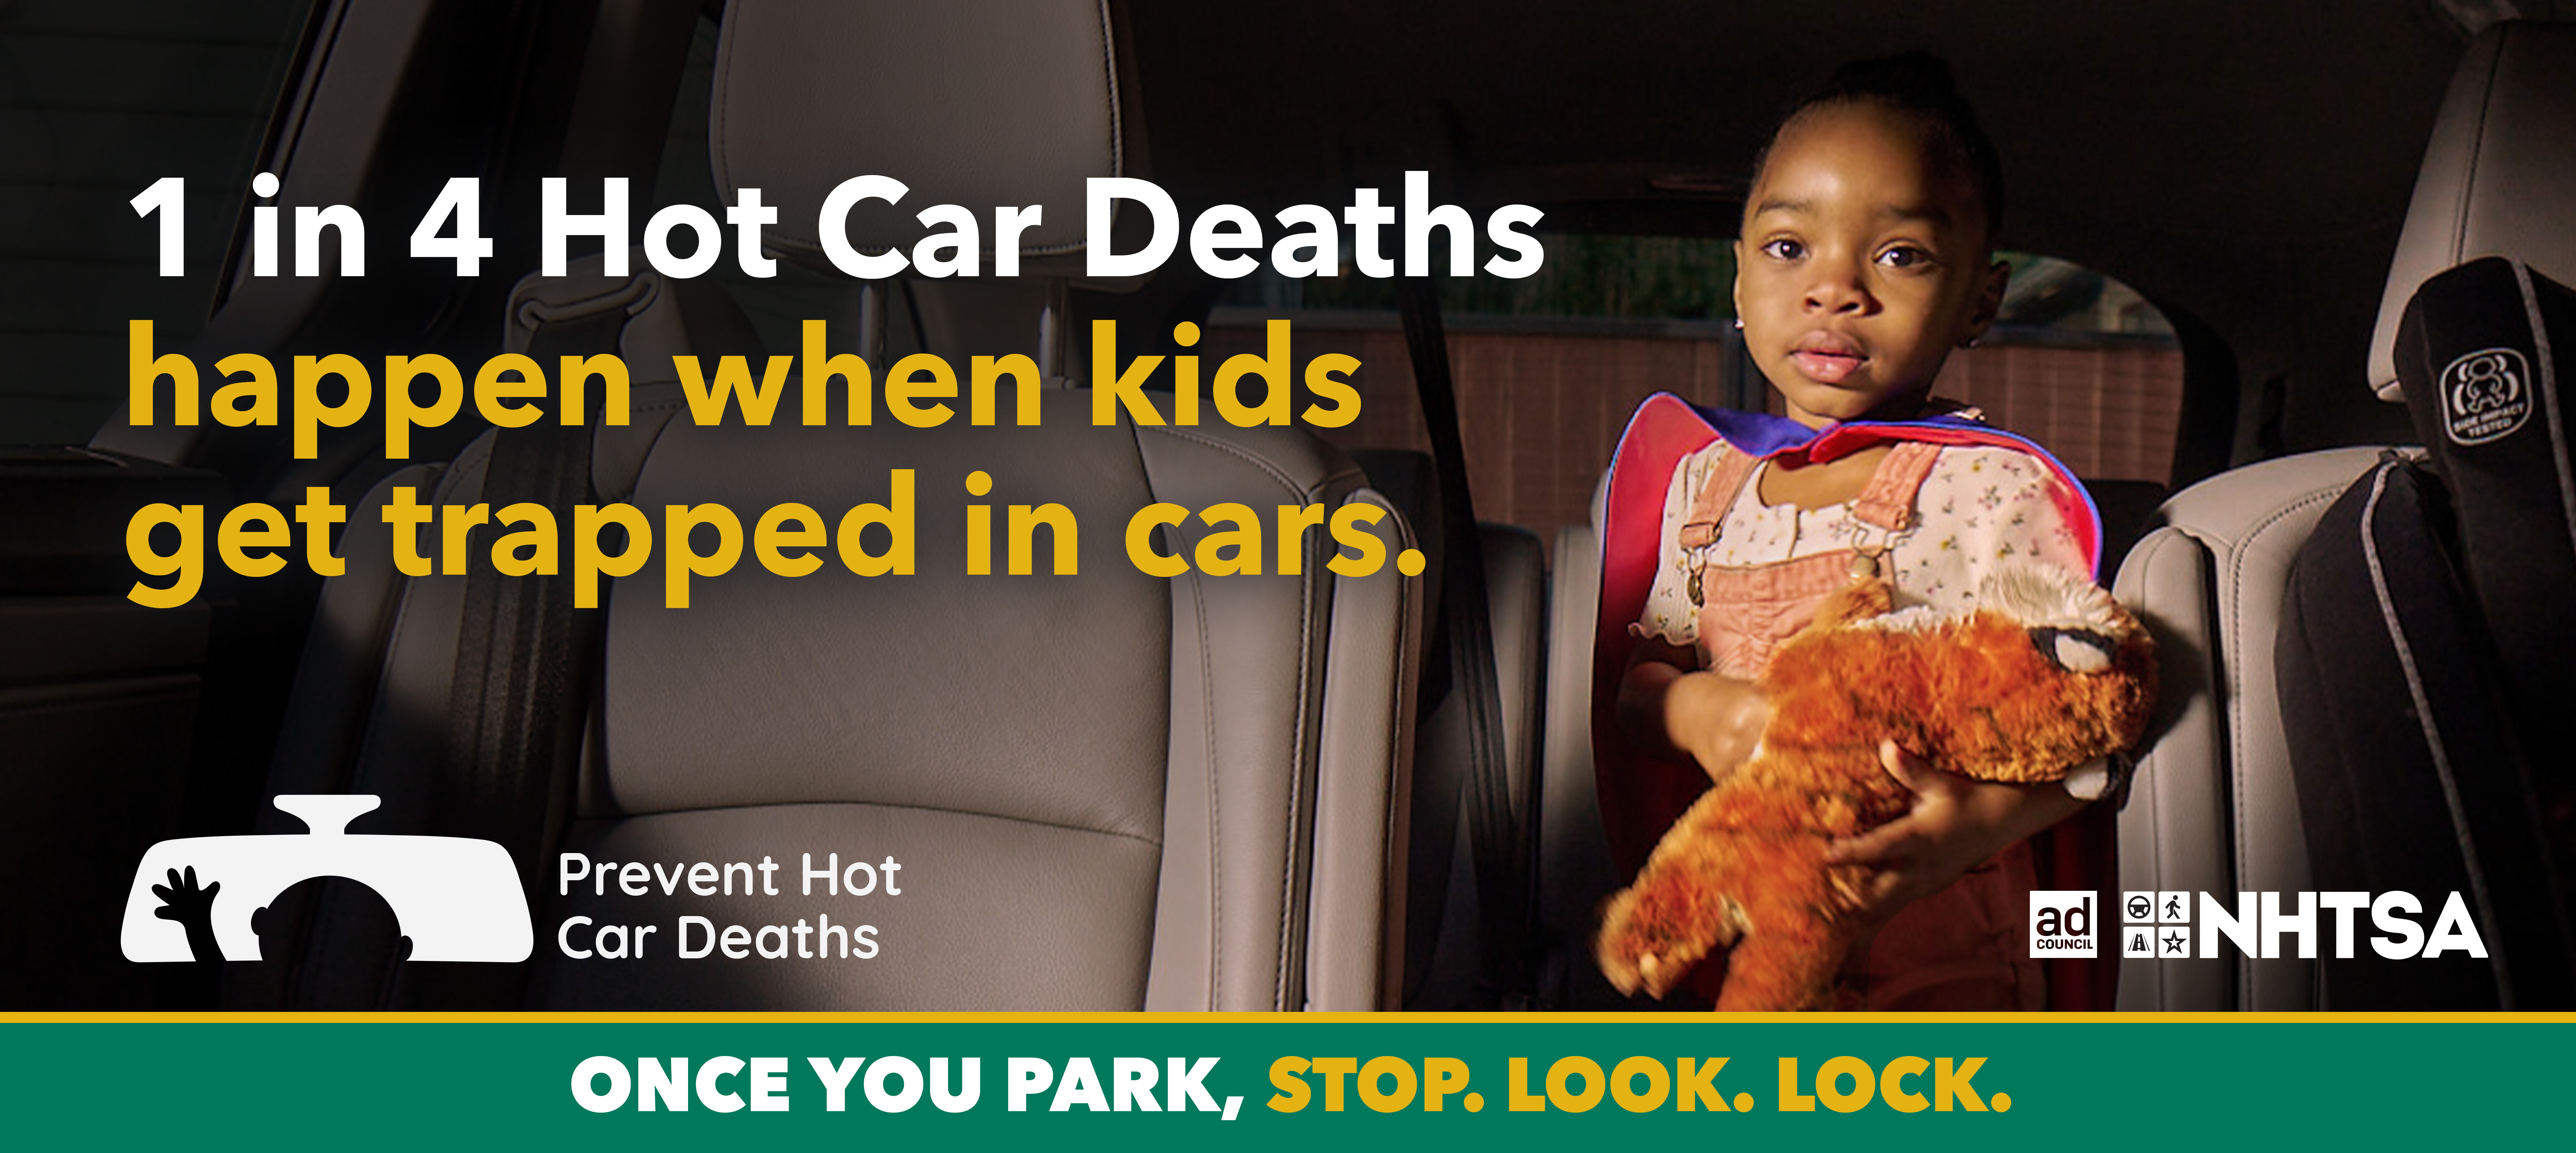 1 in 4 hot car deaths happen when kids get trapped in cars 